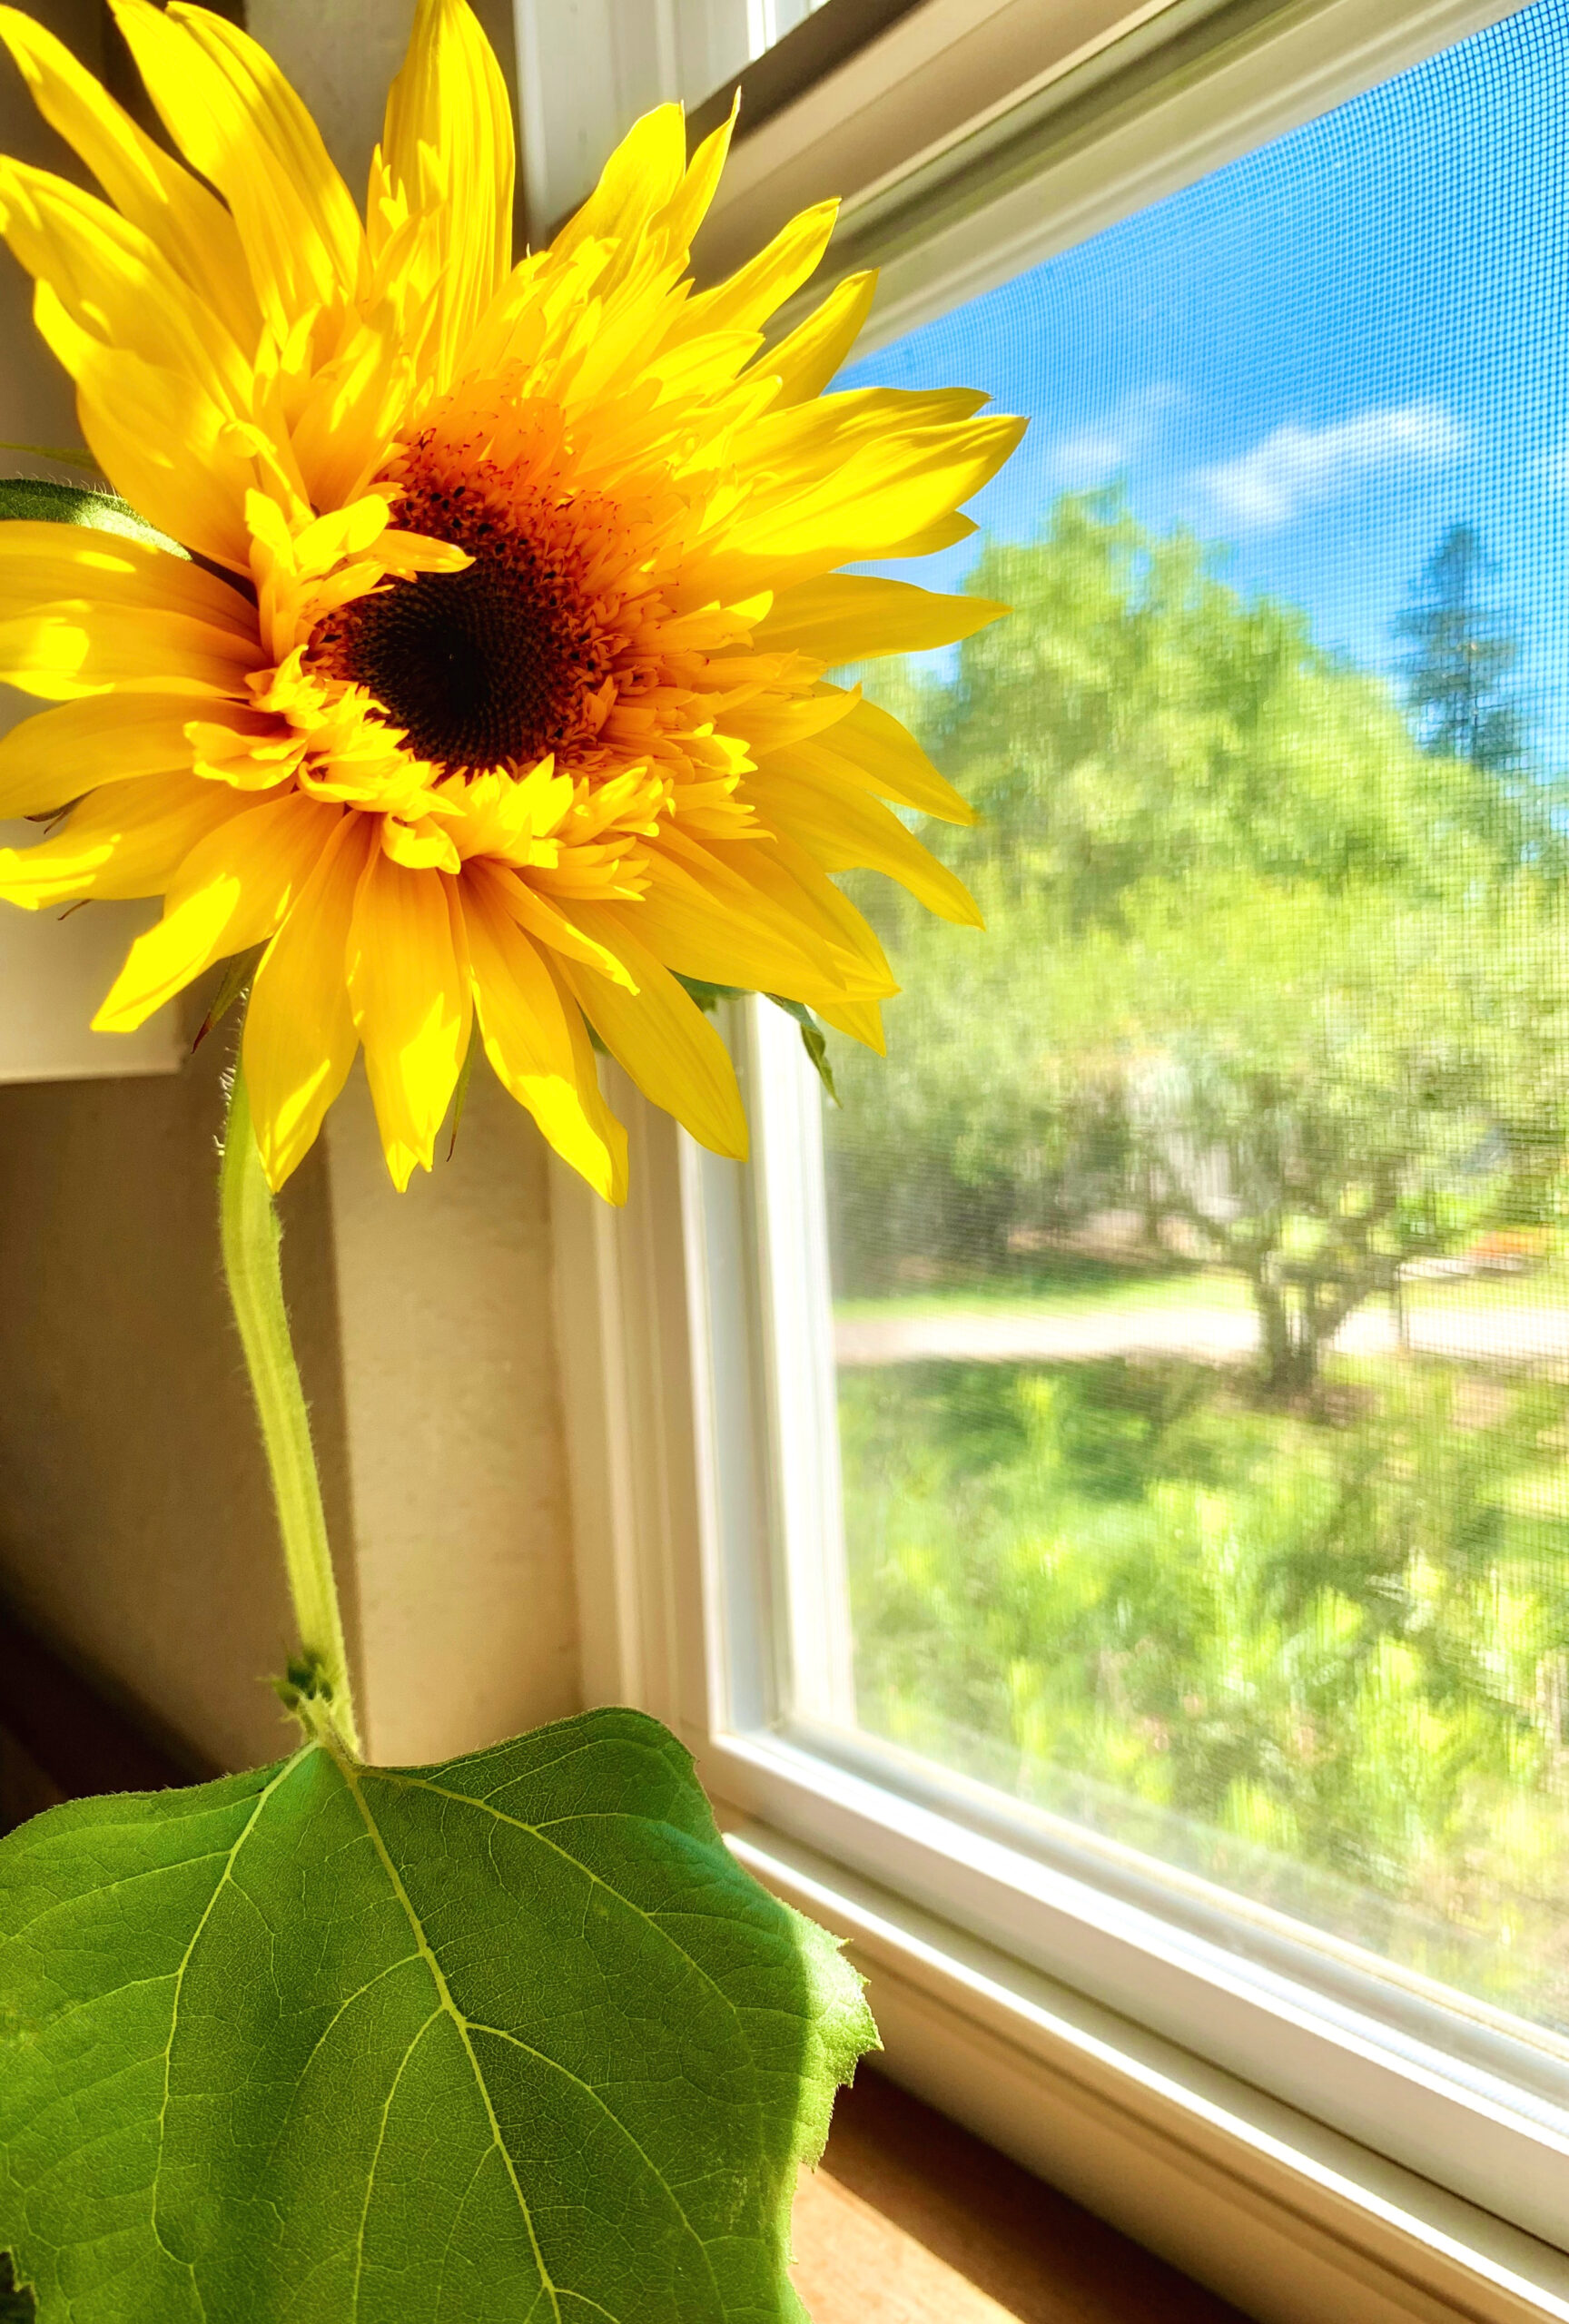 A sunflower sits in front of a window.